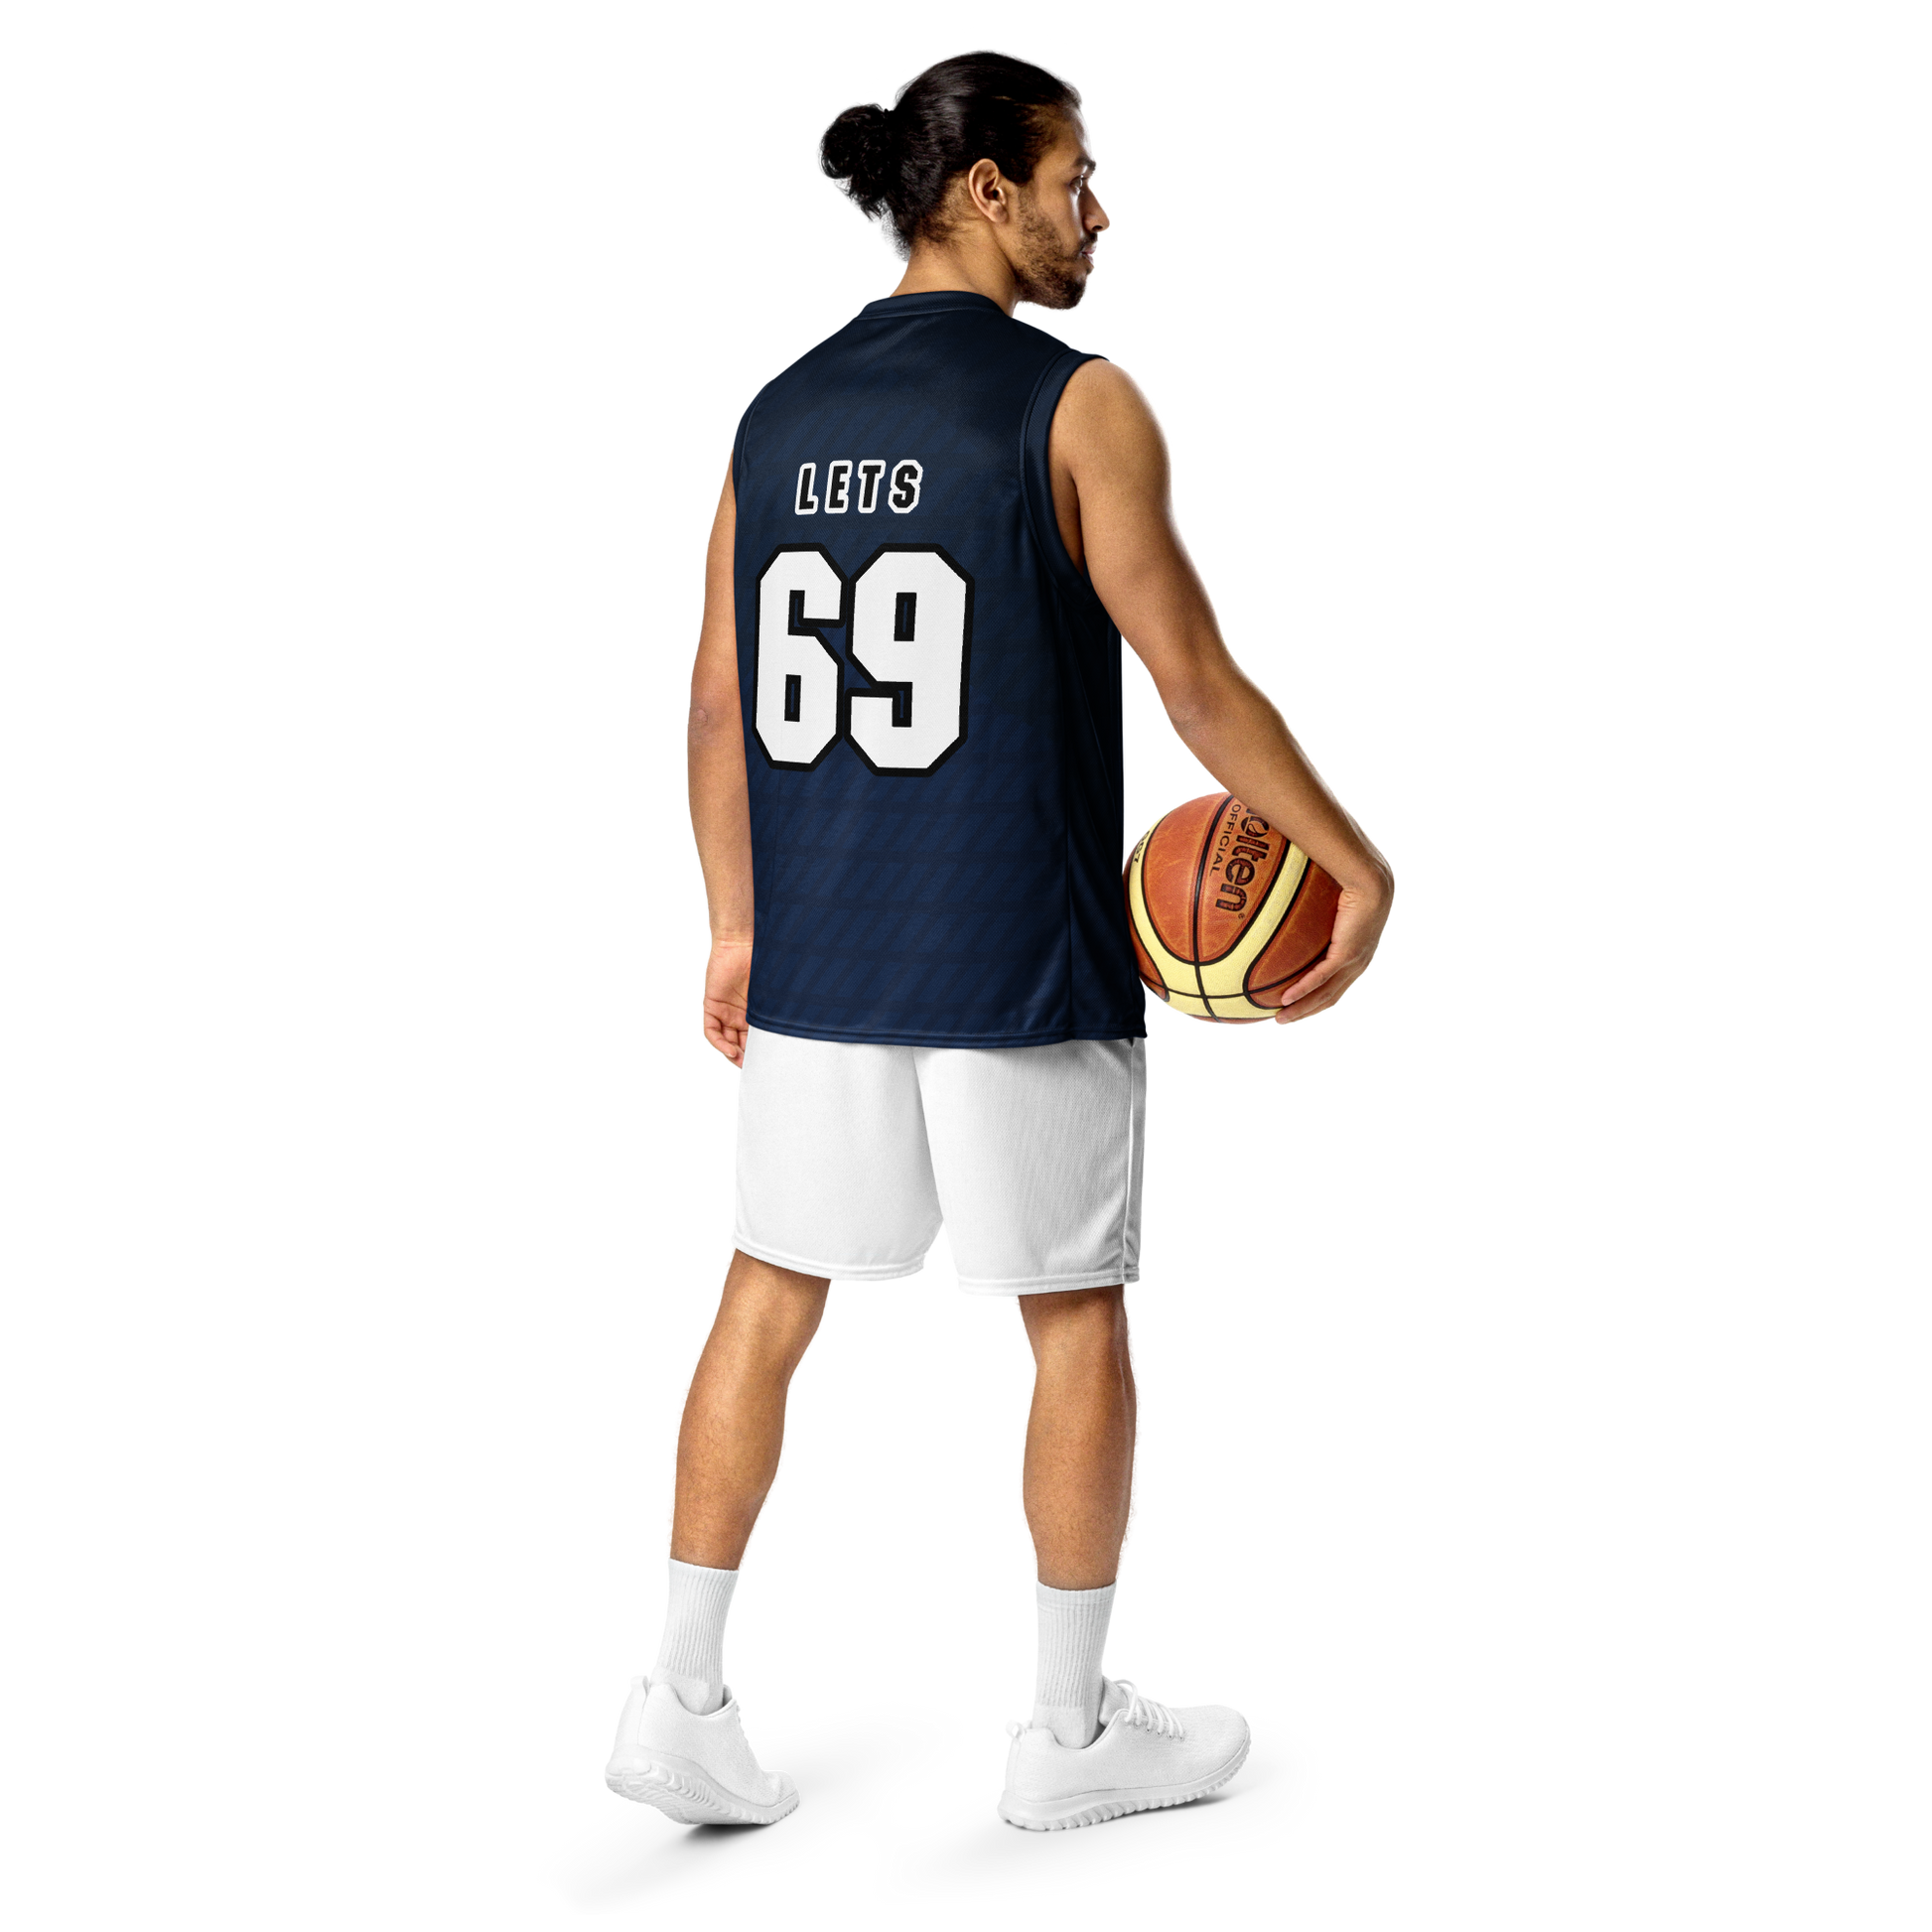 basketball jersey outfit men Off 69% 